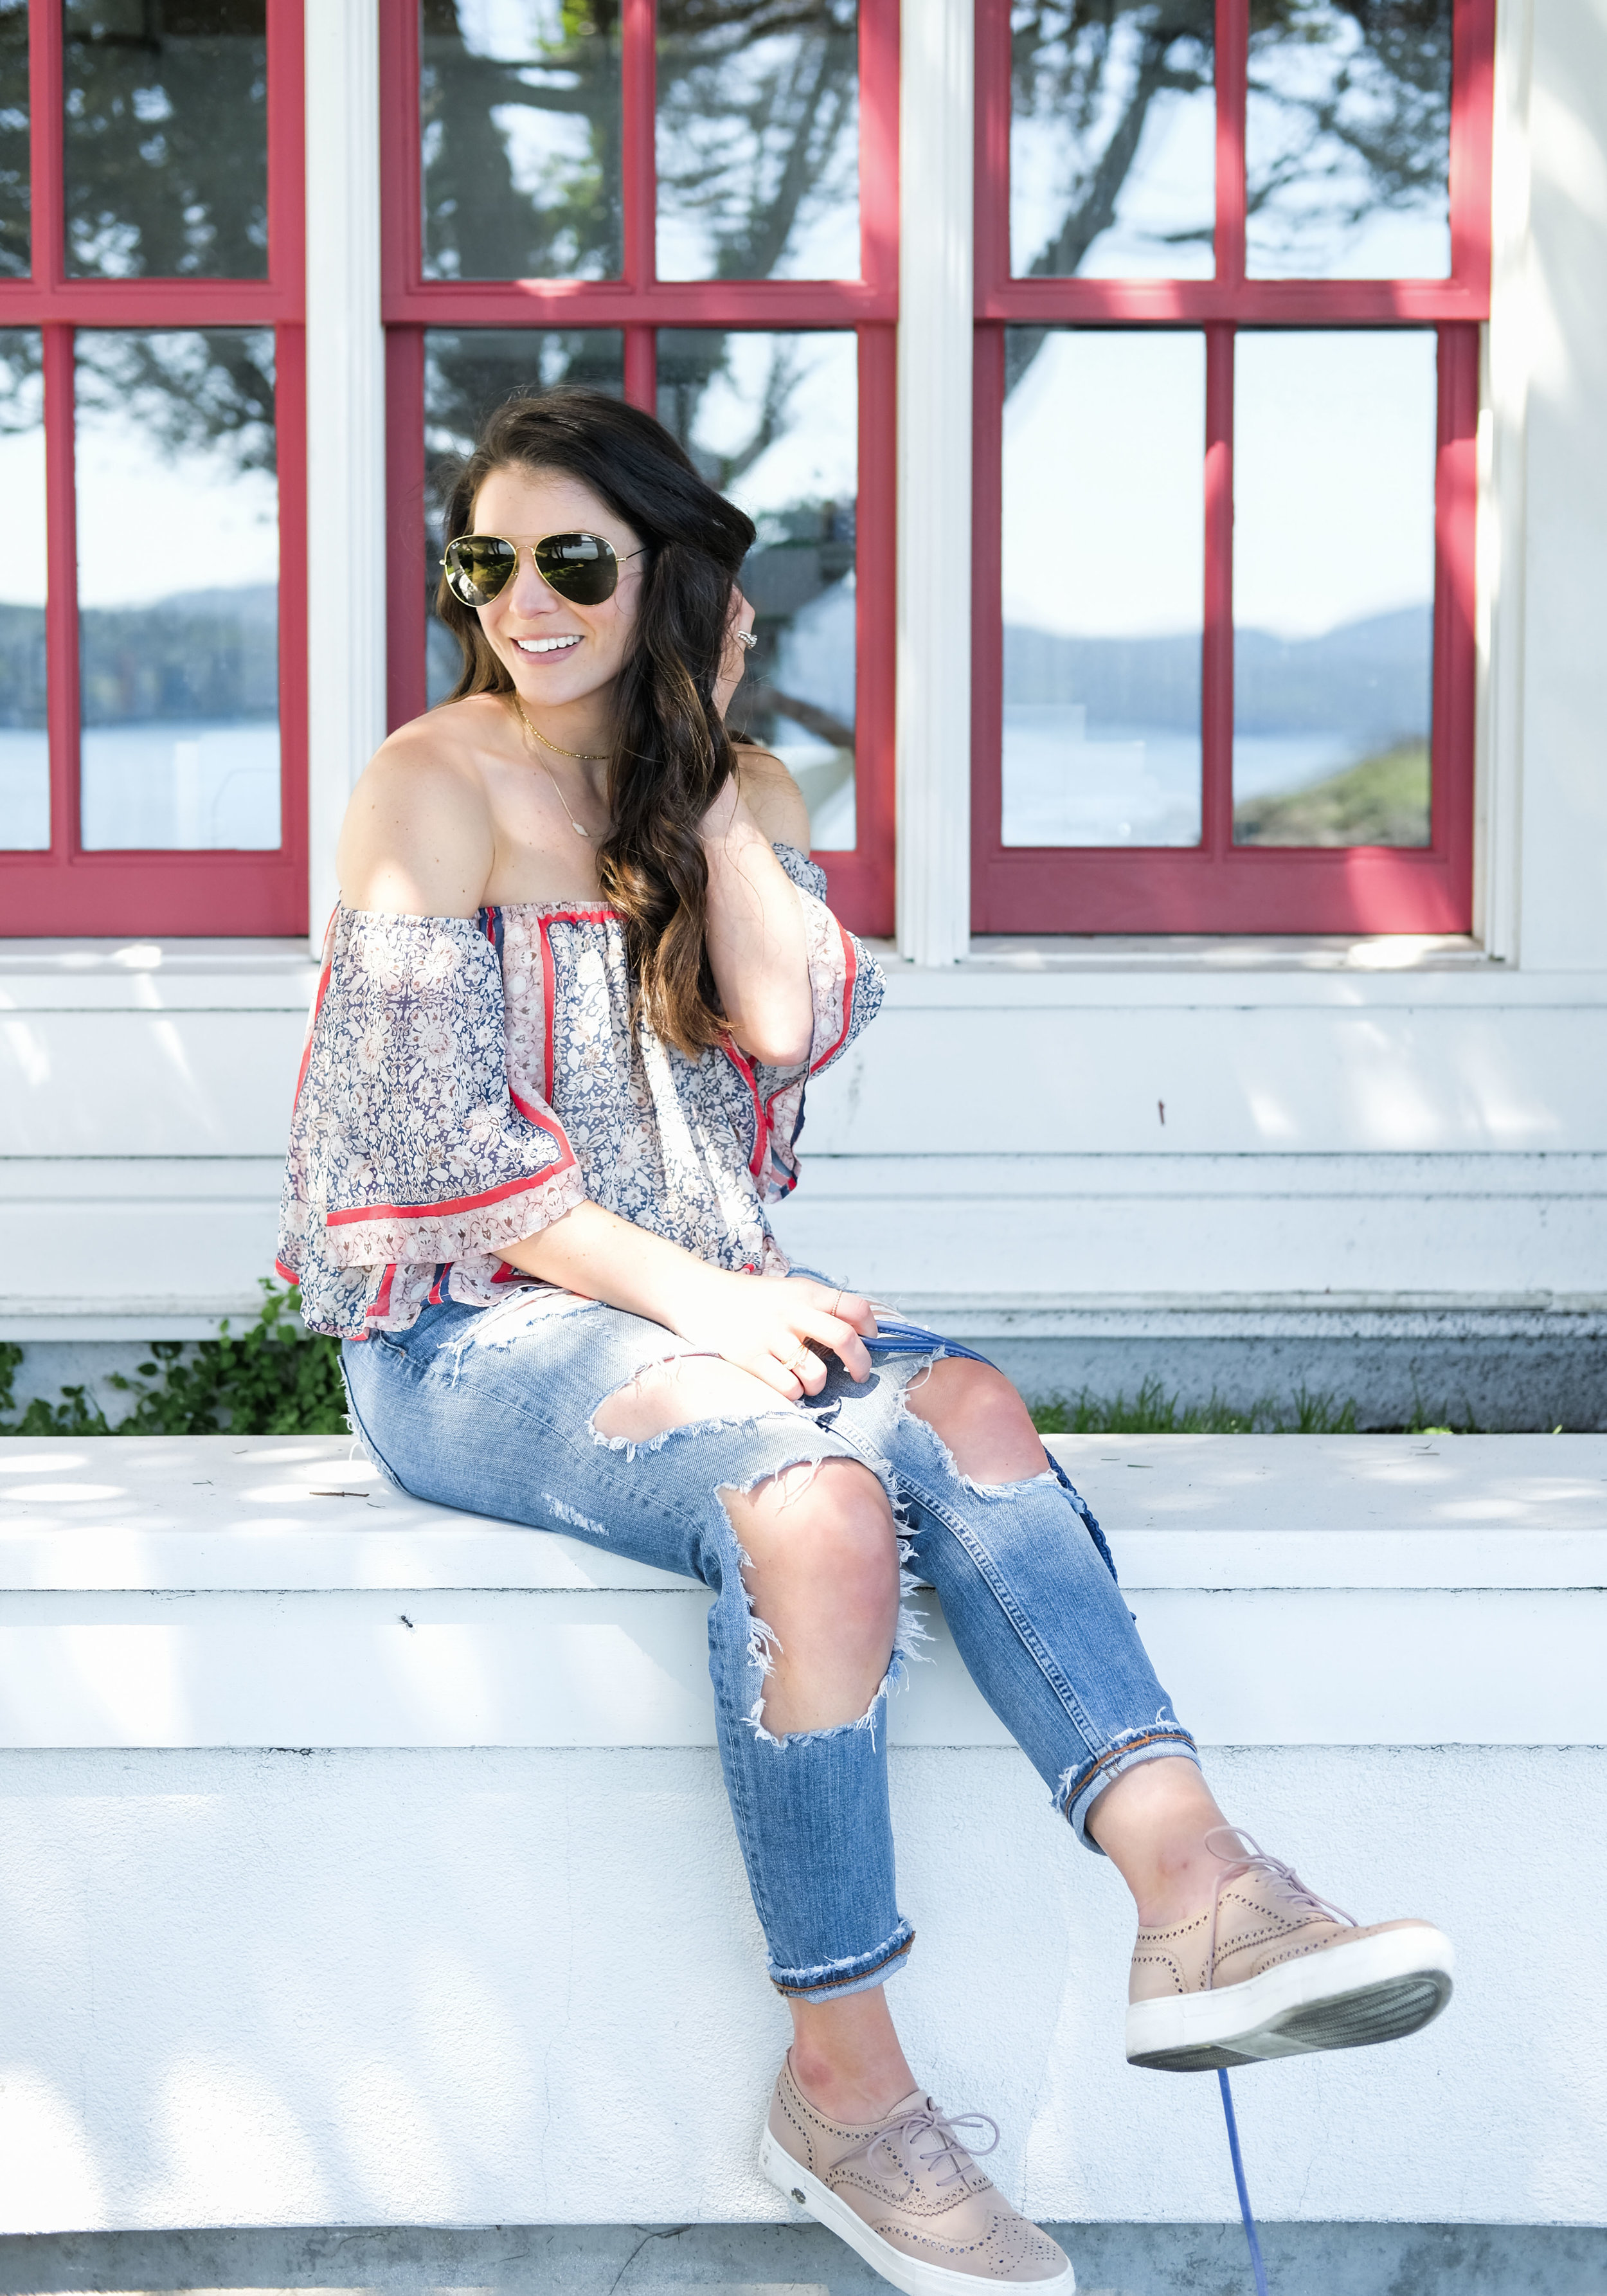 san juan islands washington_orcas island travel guide_what to do where to stay in san juan islands washington_comfortable cute travel shoes_off the shoulder top_destroyed skinny jeans_shellys london kimmie sneakers_11.jpg